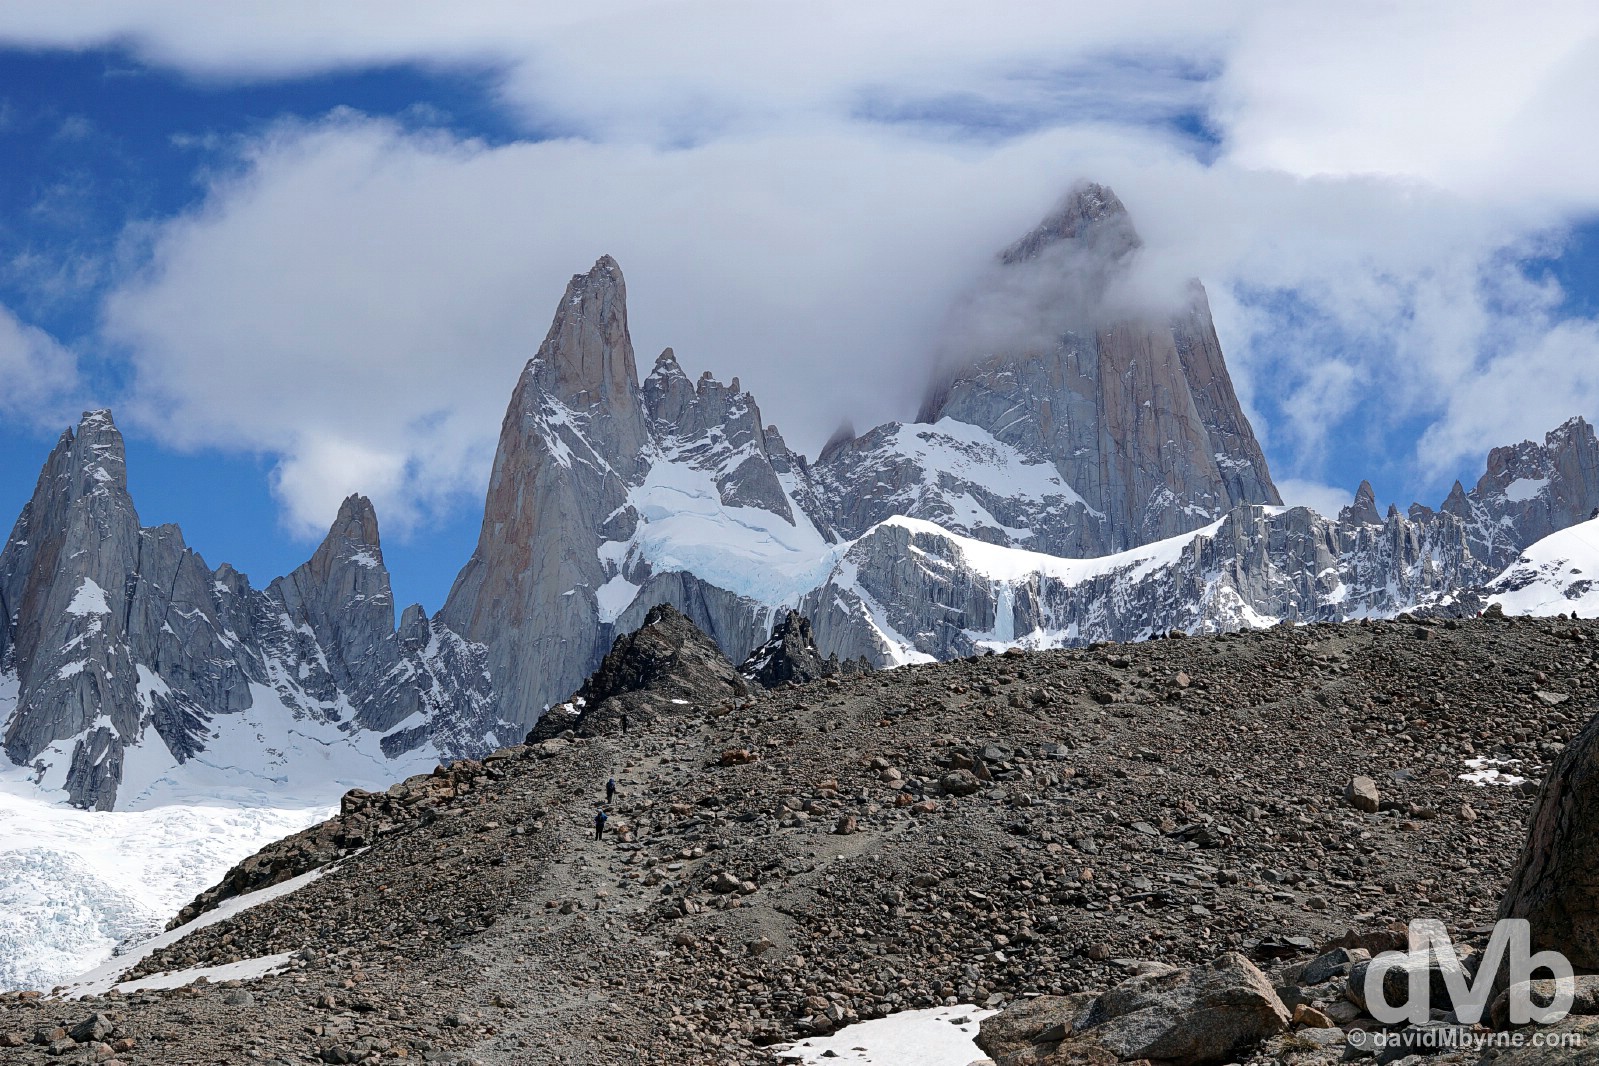 Hiking towards the cloud-covered peaks of the Fitz Roy sector of Parque Nacional Los Glaciares, southern Patagonia, Argentina. November 4, 2015.